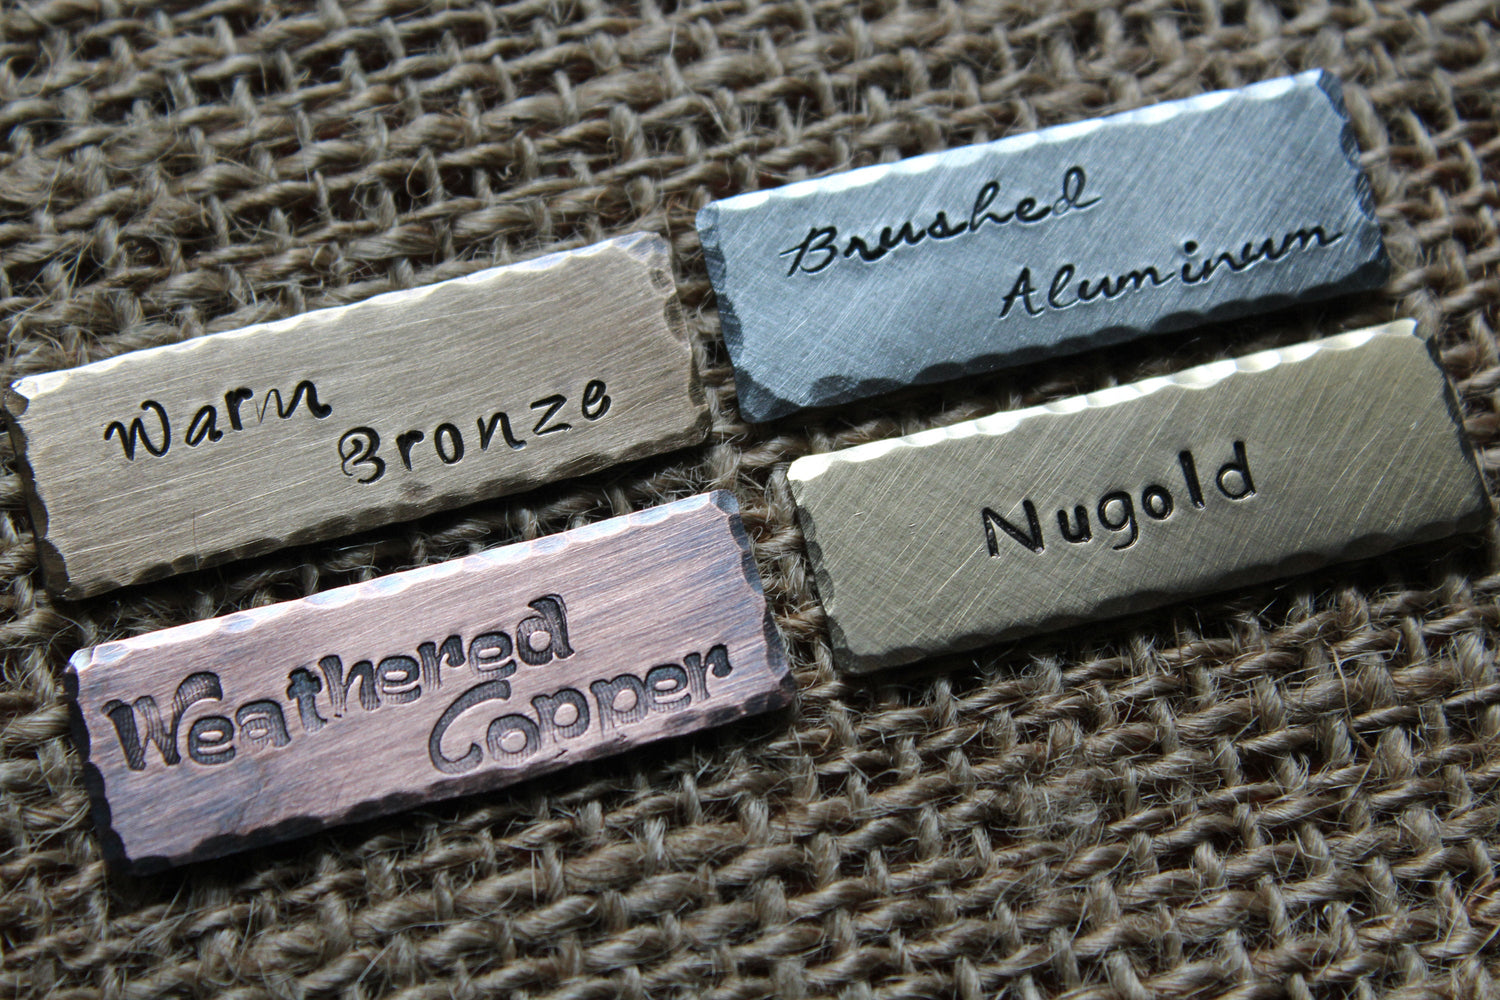 Dog Tag, Dog Tag for Dogs, Dog Tags, Pet ID Tag, Cassie, Personalized Dog Tag, Custom Dog Tag, Hand Stamped